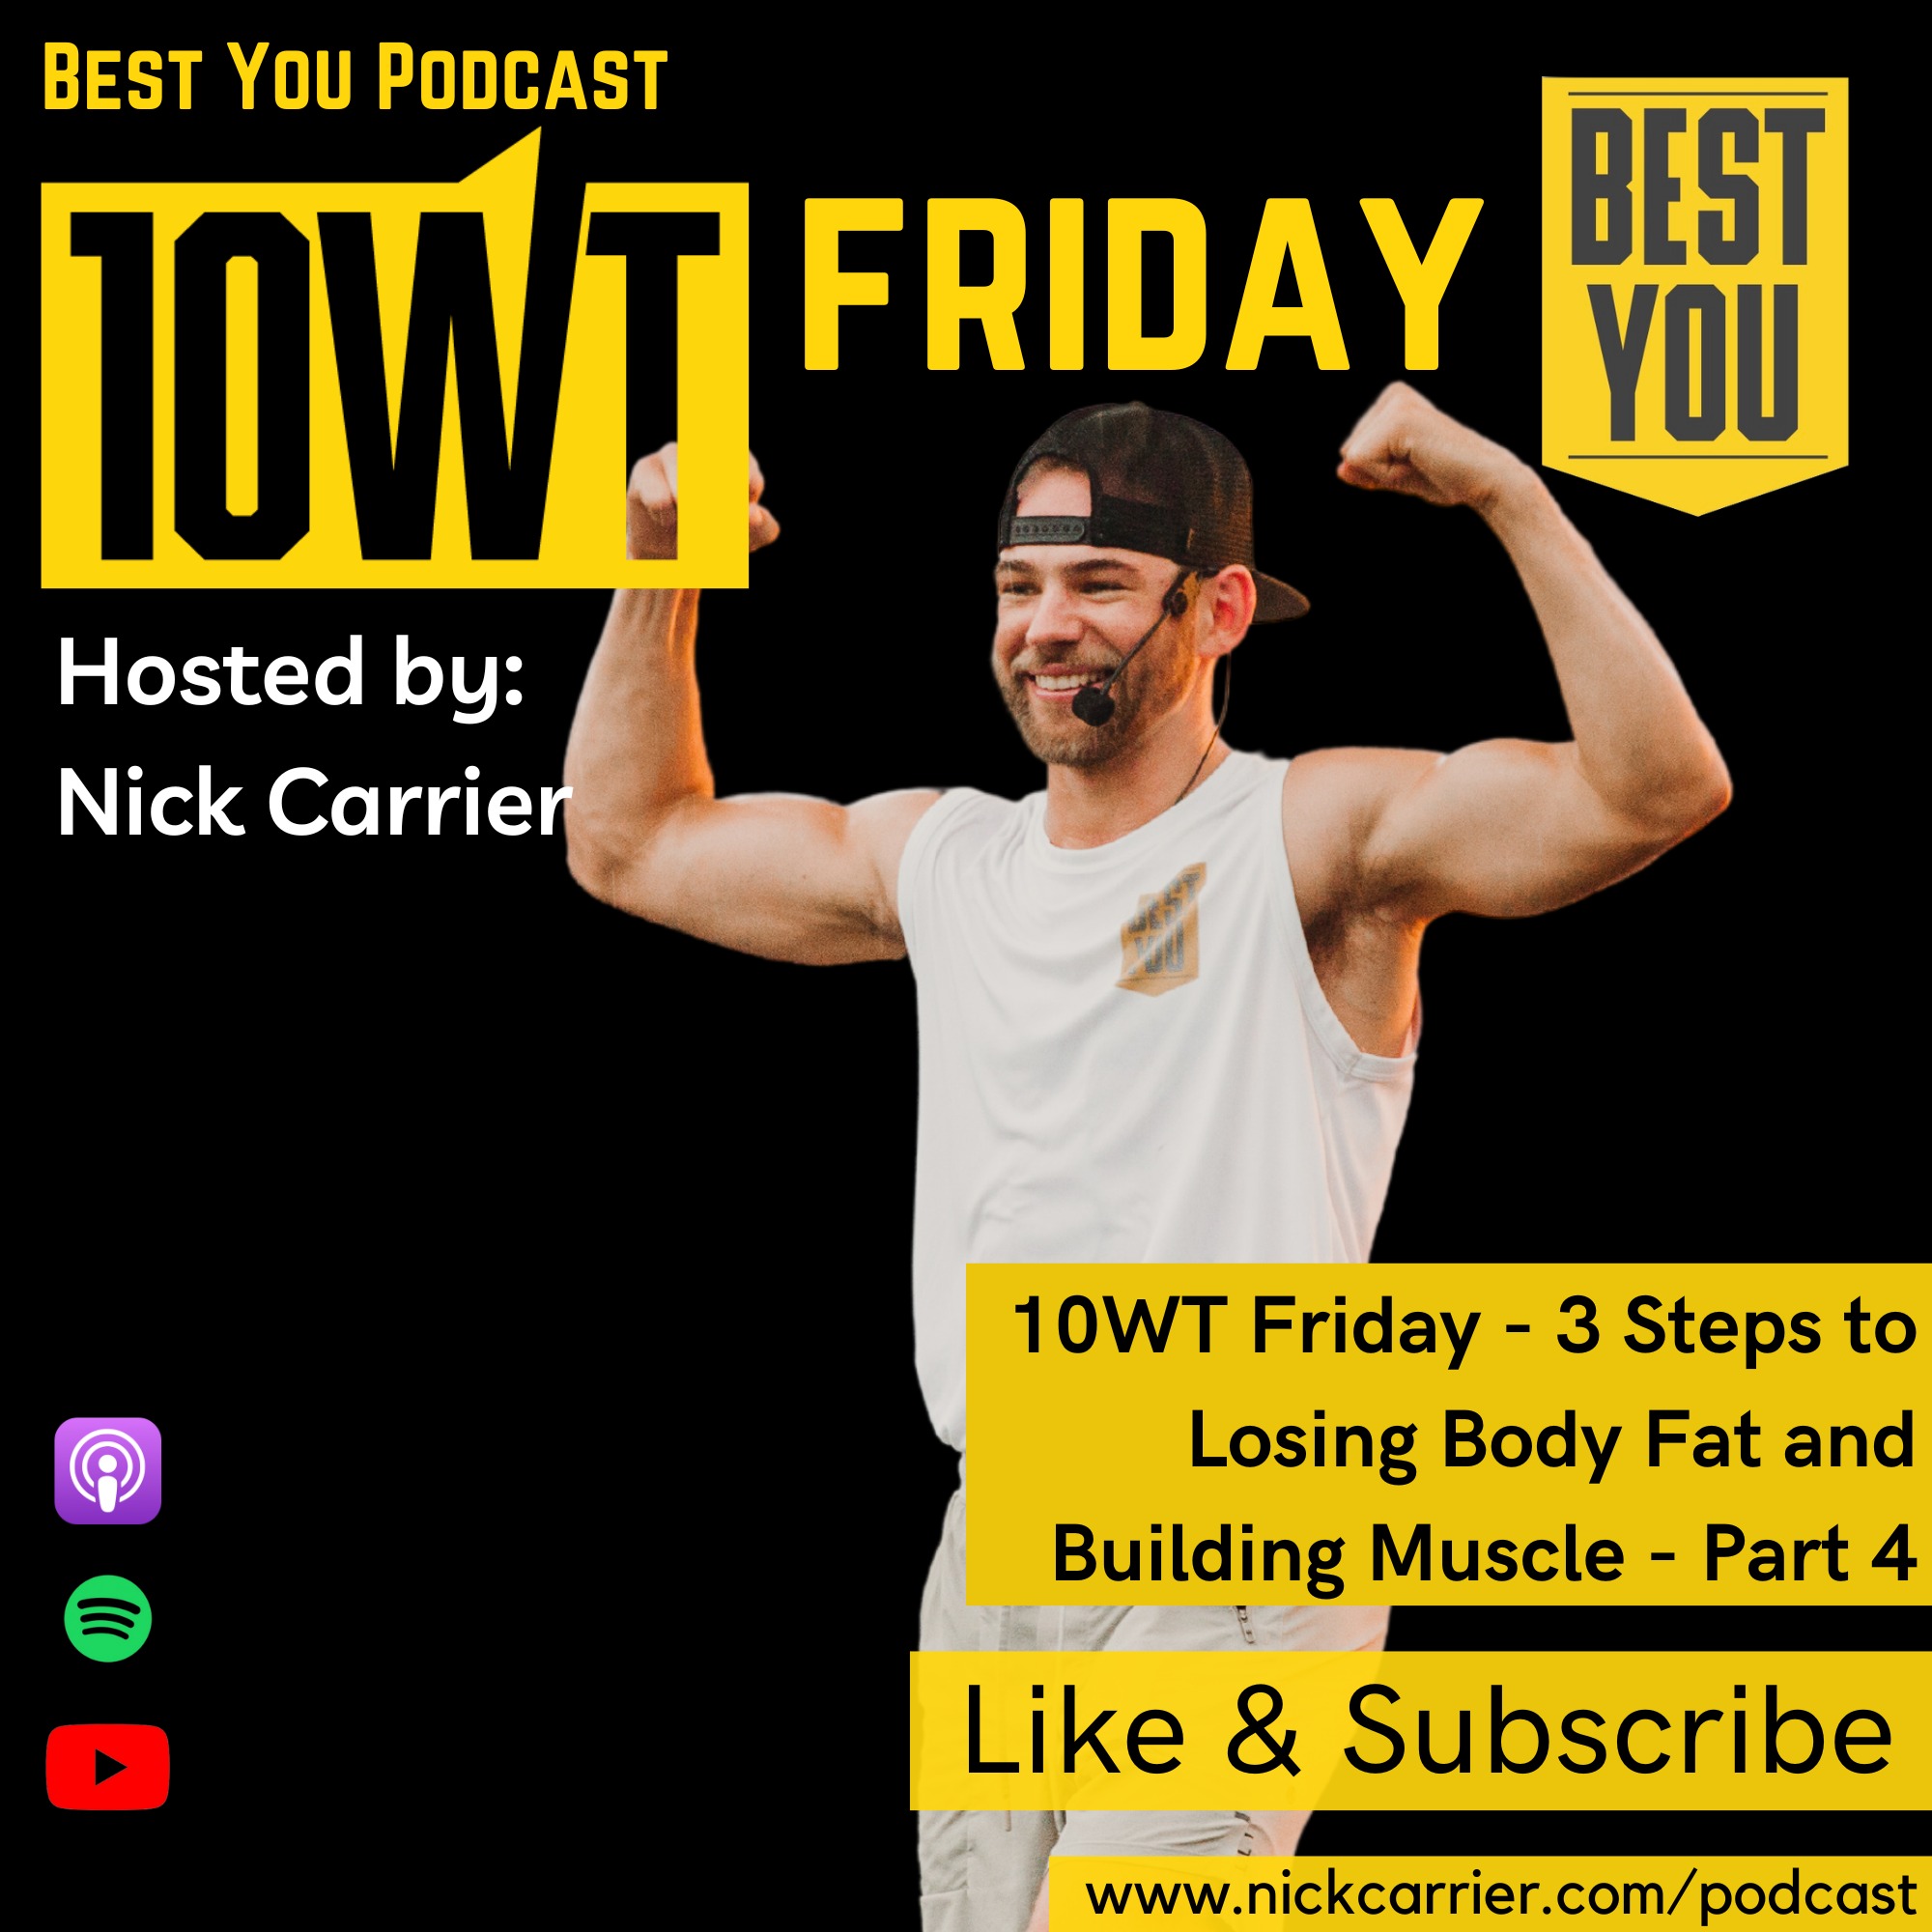 10WT Friday - 3 Steps to Losing Body Fat and Building Muscle - Part 4